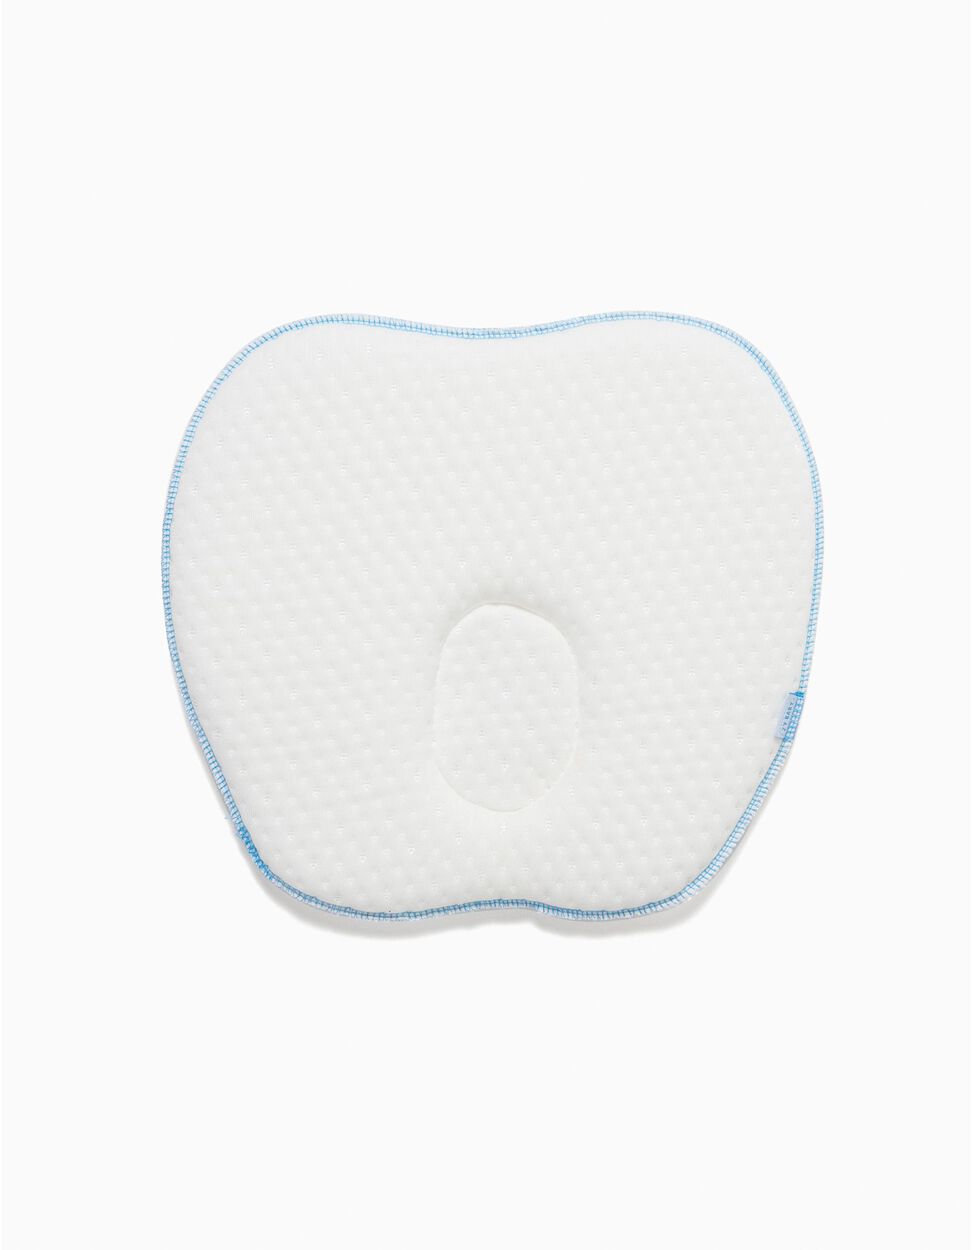 Ergo Pillow for Newborn Baby by Zy Baby